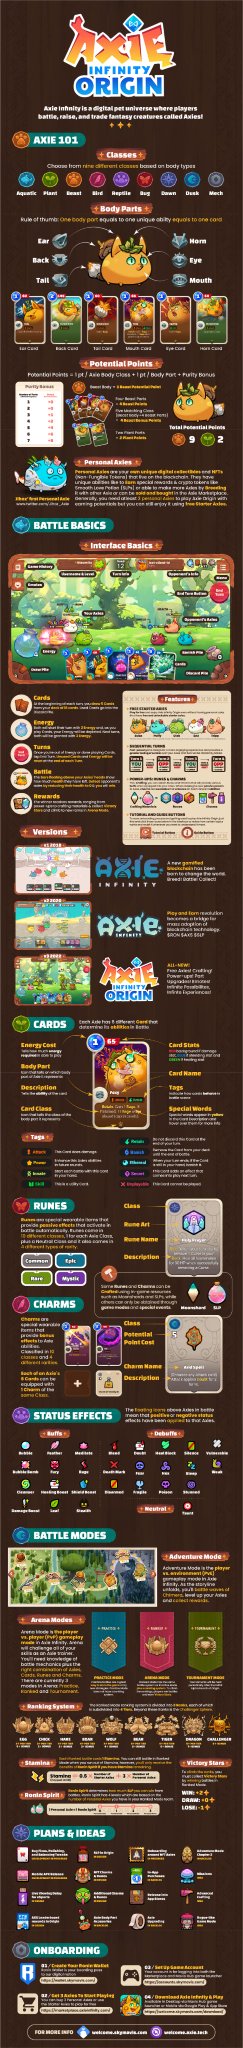 RT blaumitz: ⭐️@AxieInfinity #Origin Infographic⭐️  Made an alternative format of my #OriginEducation entry with an aim to improve scrolling & zooming experience! Please feel free to share it to everyone!✨  Maraming Salamat po💖@Jihoz_Axie @axie_tech   HD [drive.google.com] [twitter.com] [pbs.twimg.com]